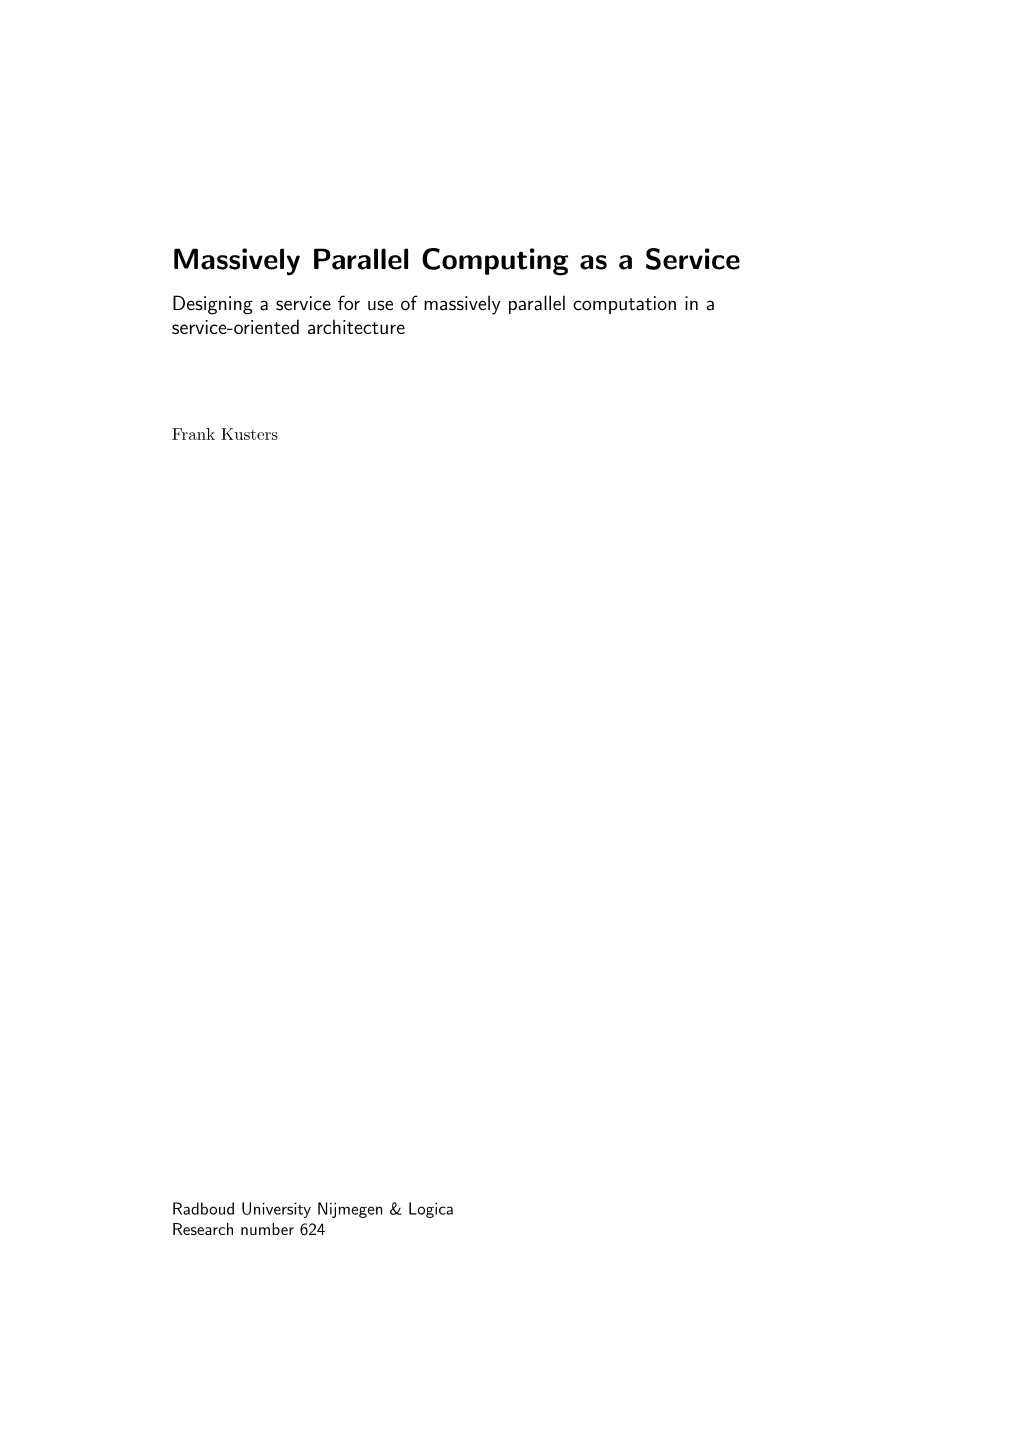 Massively Parallel Computing As a Service Designing a Service for Use of Massively Parallel Computation in a Service-Oriented Architecture